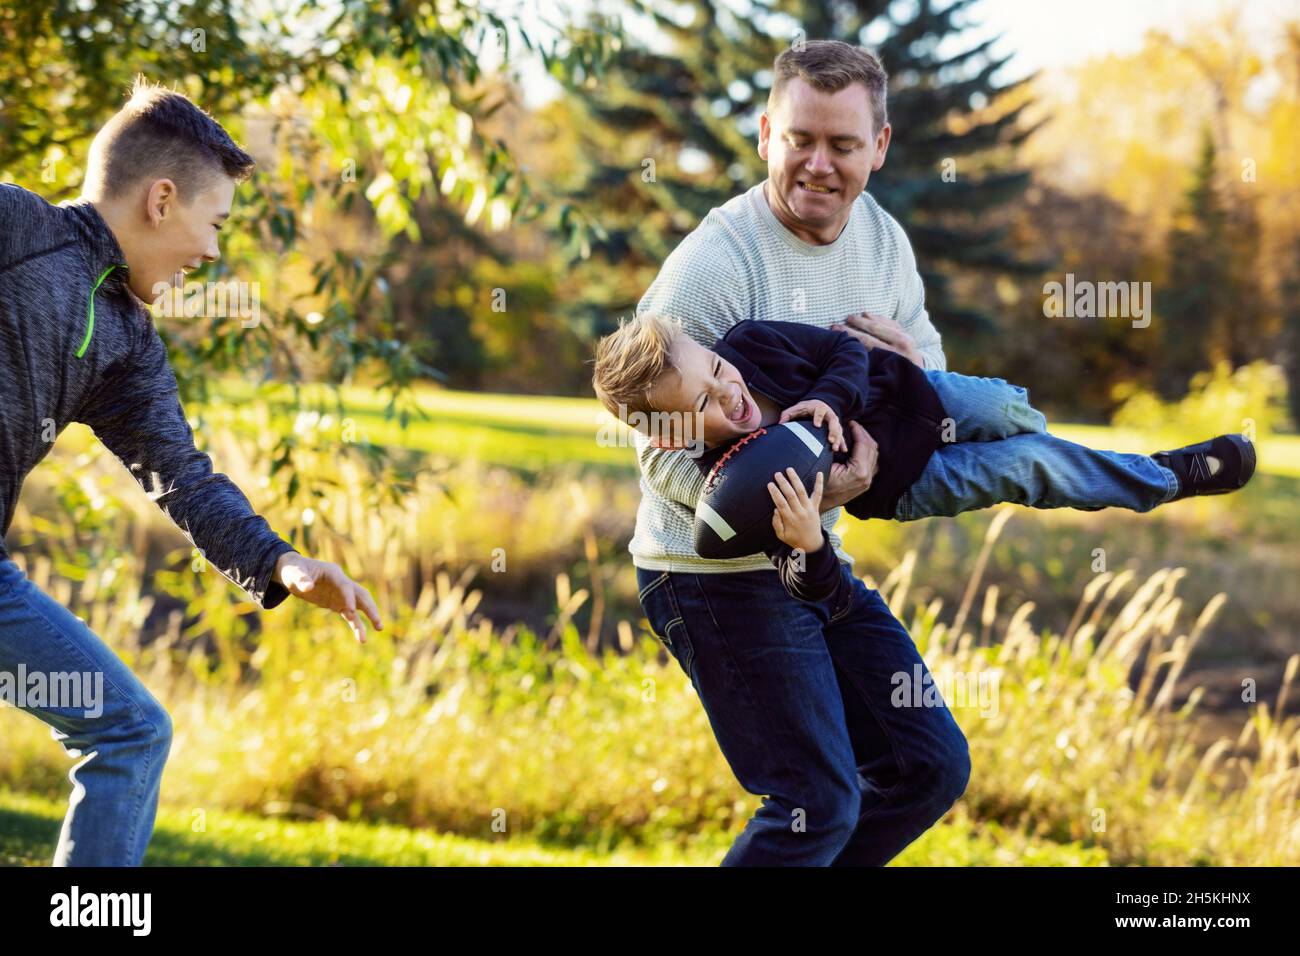 Father playing with his two sons in a park in autumn; St. Albert, Alberta, Canada Stock Photo